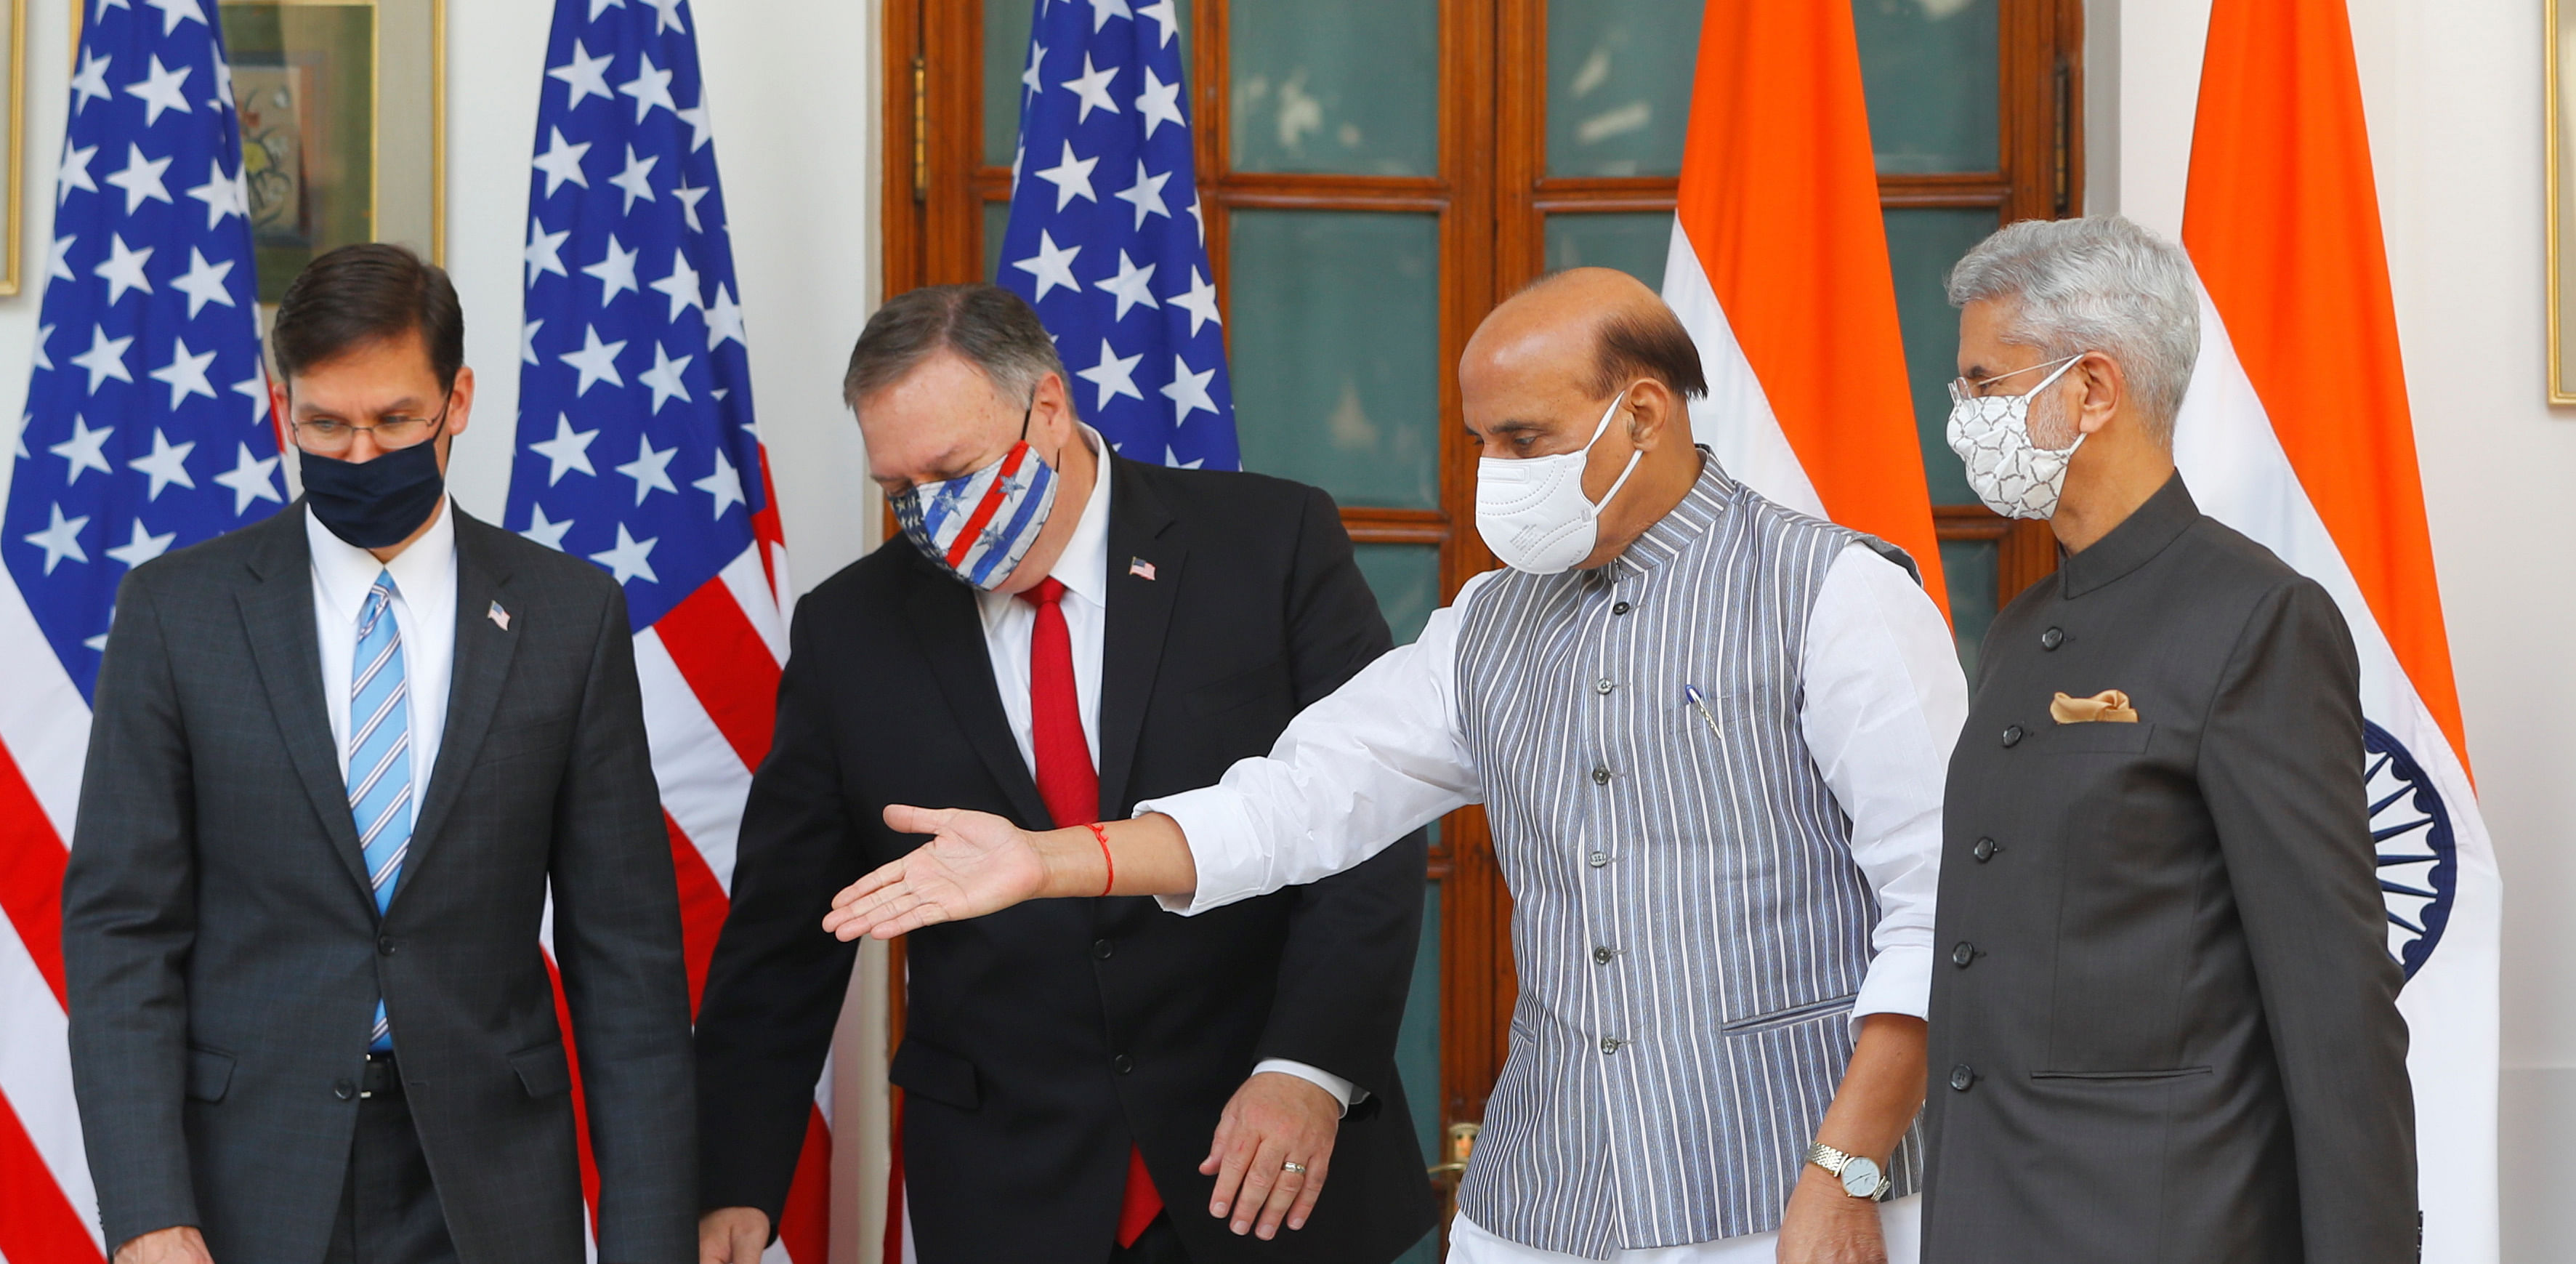 External Affairs Minister S Jaishankar and Defence Minister Rajath Singh held the talks with US Secretary of State Mike Pompeo and Defence Secretary Mark T Esper. Both sides were assisted by their top military and security officials. Credit: Reuters